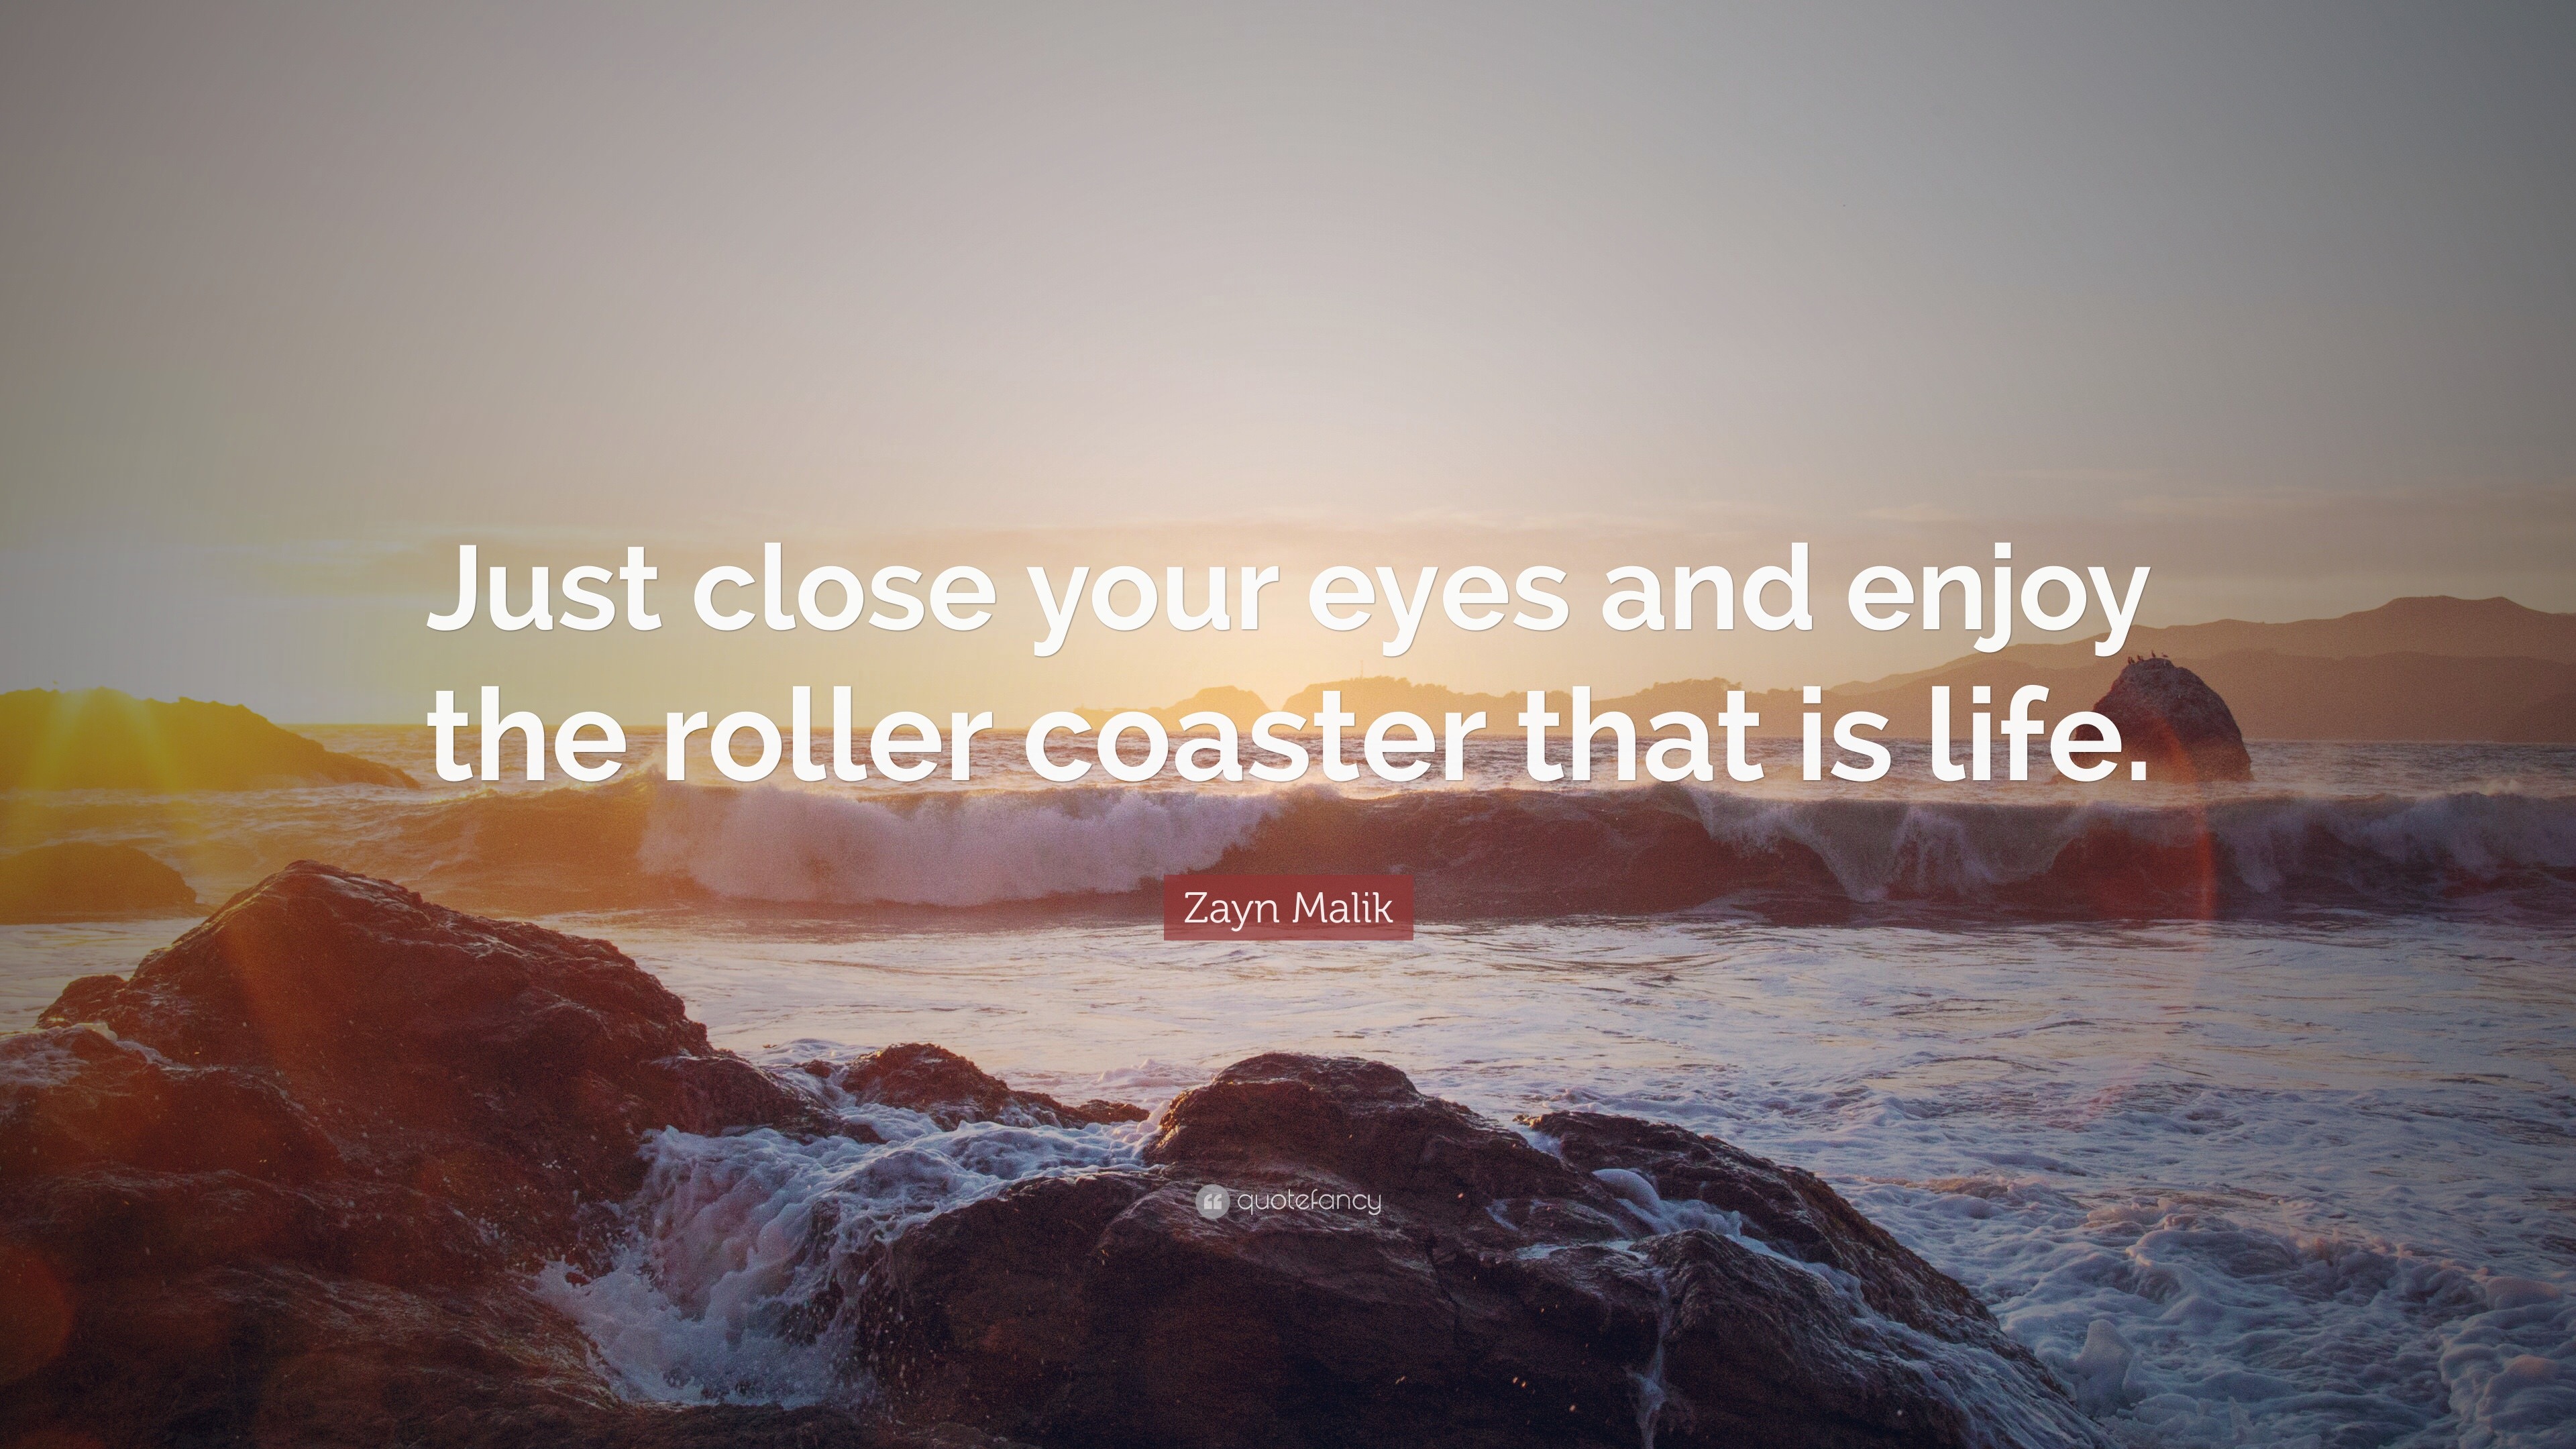 Zayn Malik Quote “Just close your eyes and enjoy the roller coaster that is